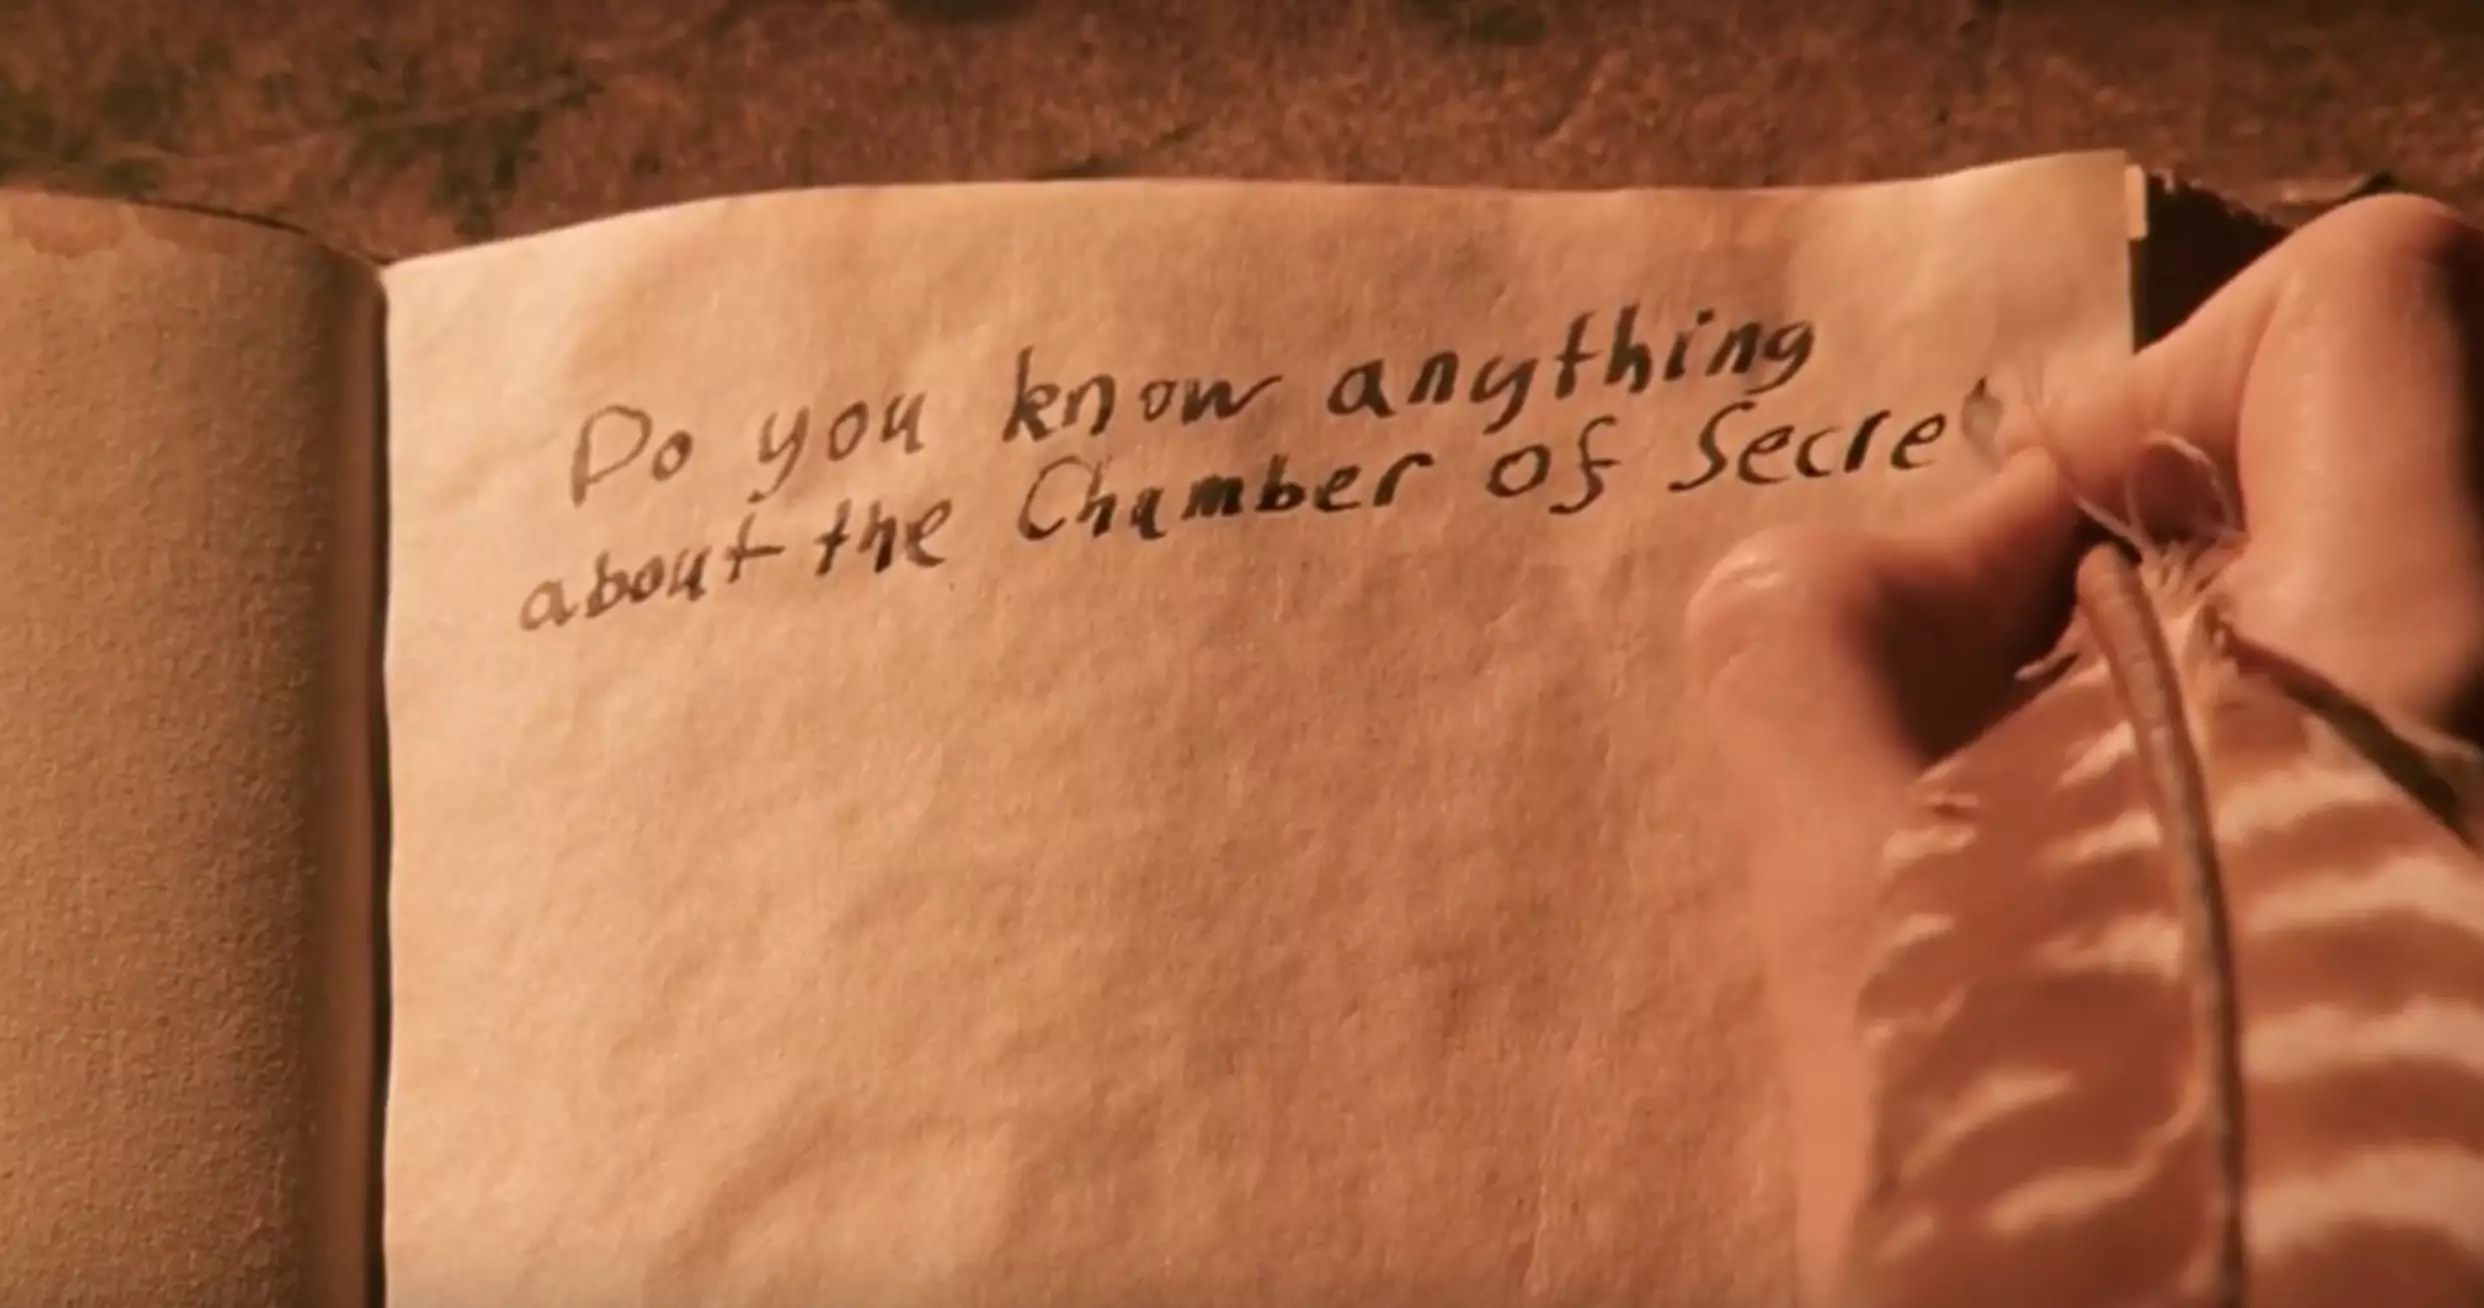 Harry Potter chats to Tom Riddle through the diary, not knowing it's his enemy Voldemort.